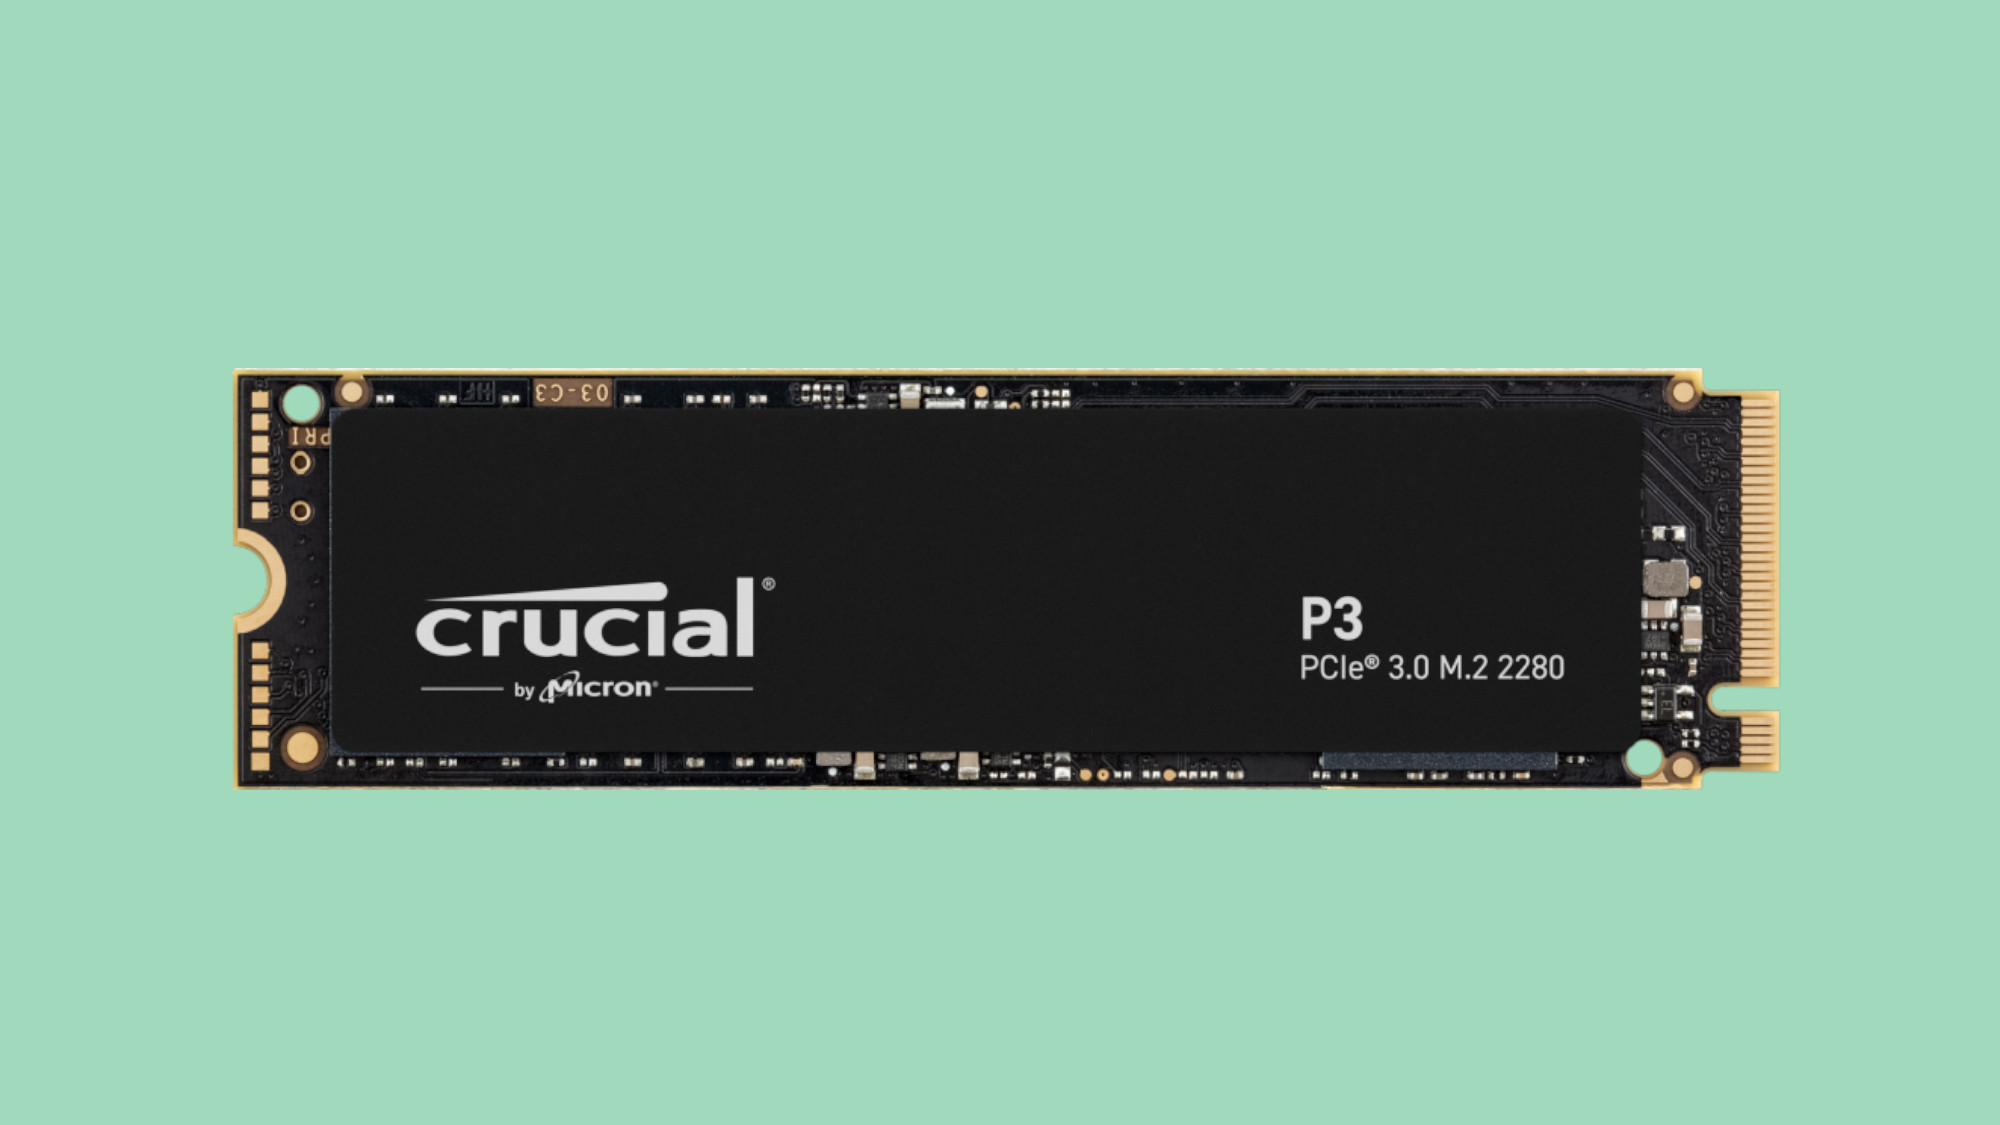 Crucial P3 SSD on a light green background